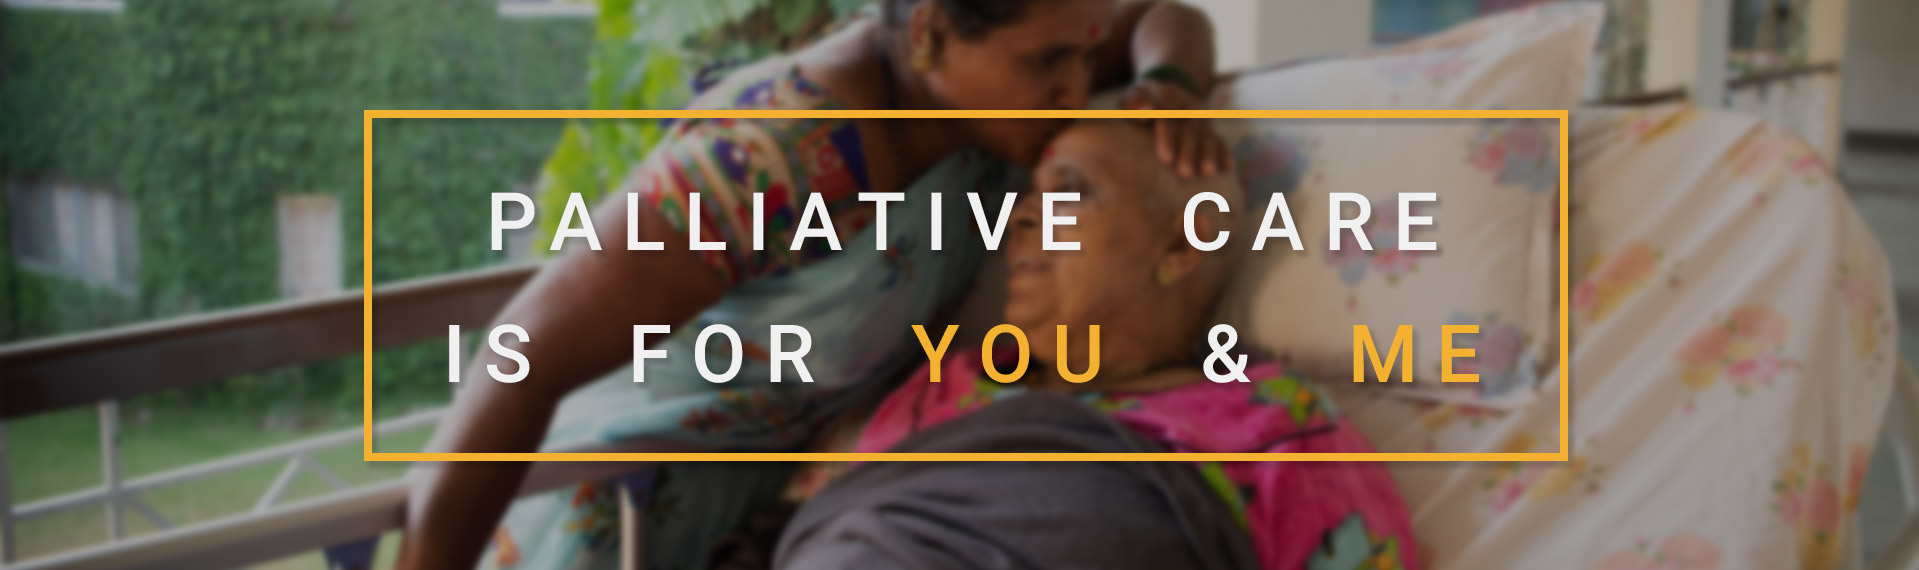 Palliative Care is for you and me